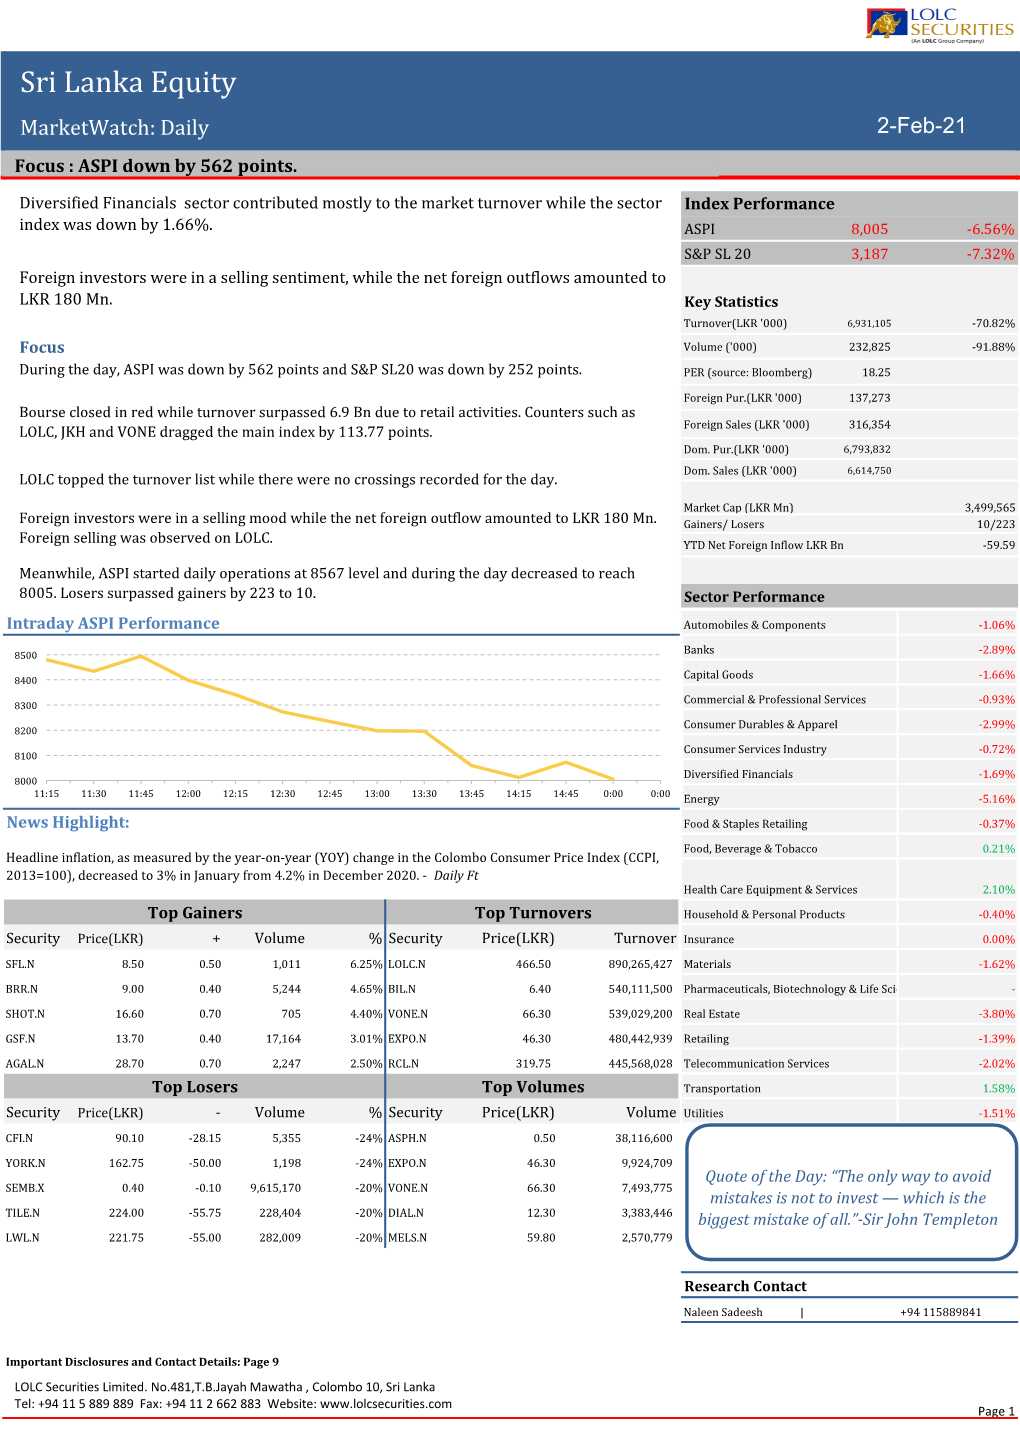 Sri Lanka Equity Marketwatch: Daily 2-Feb-21 Focus : ASPI Down by 562 Points